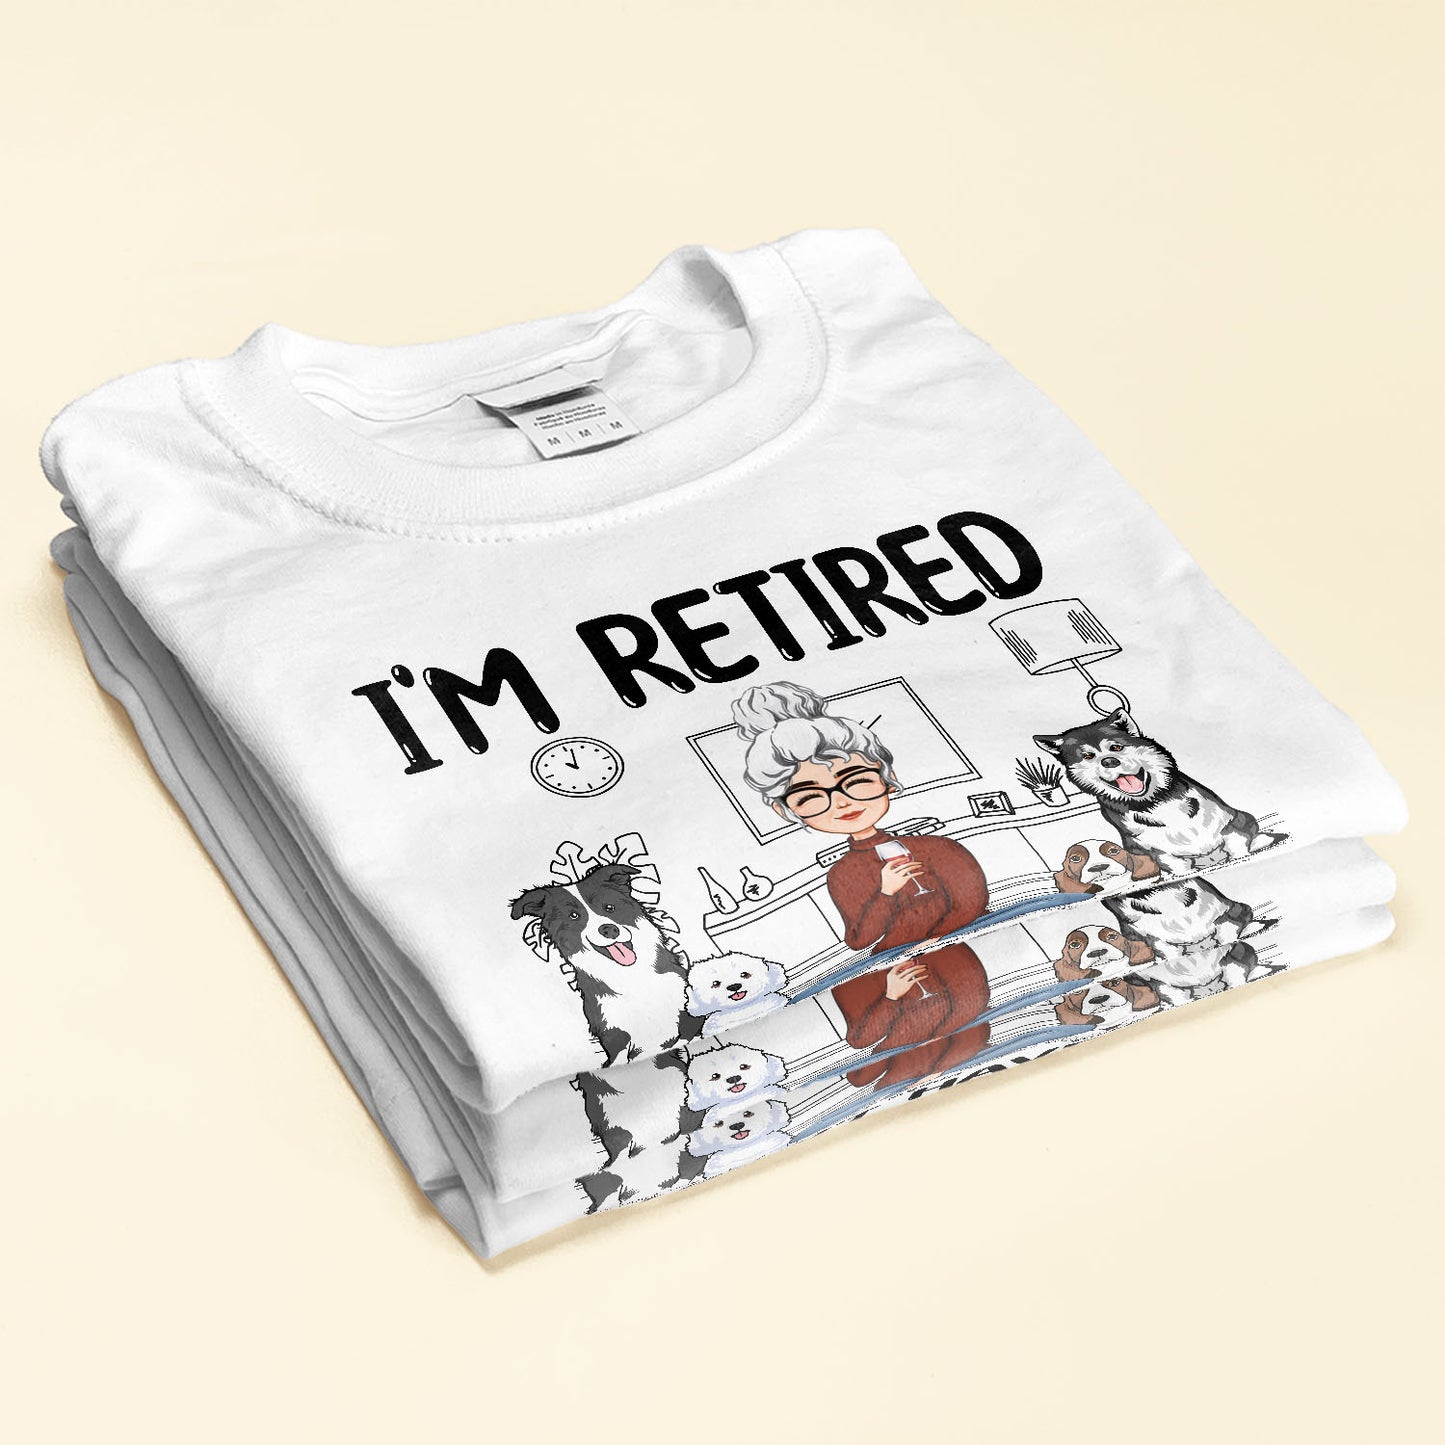 I'm Retired, You Don't Make Me - Personalized Shirt